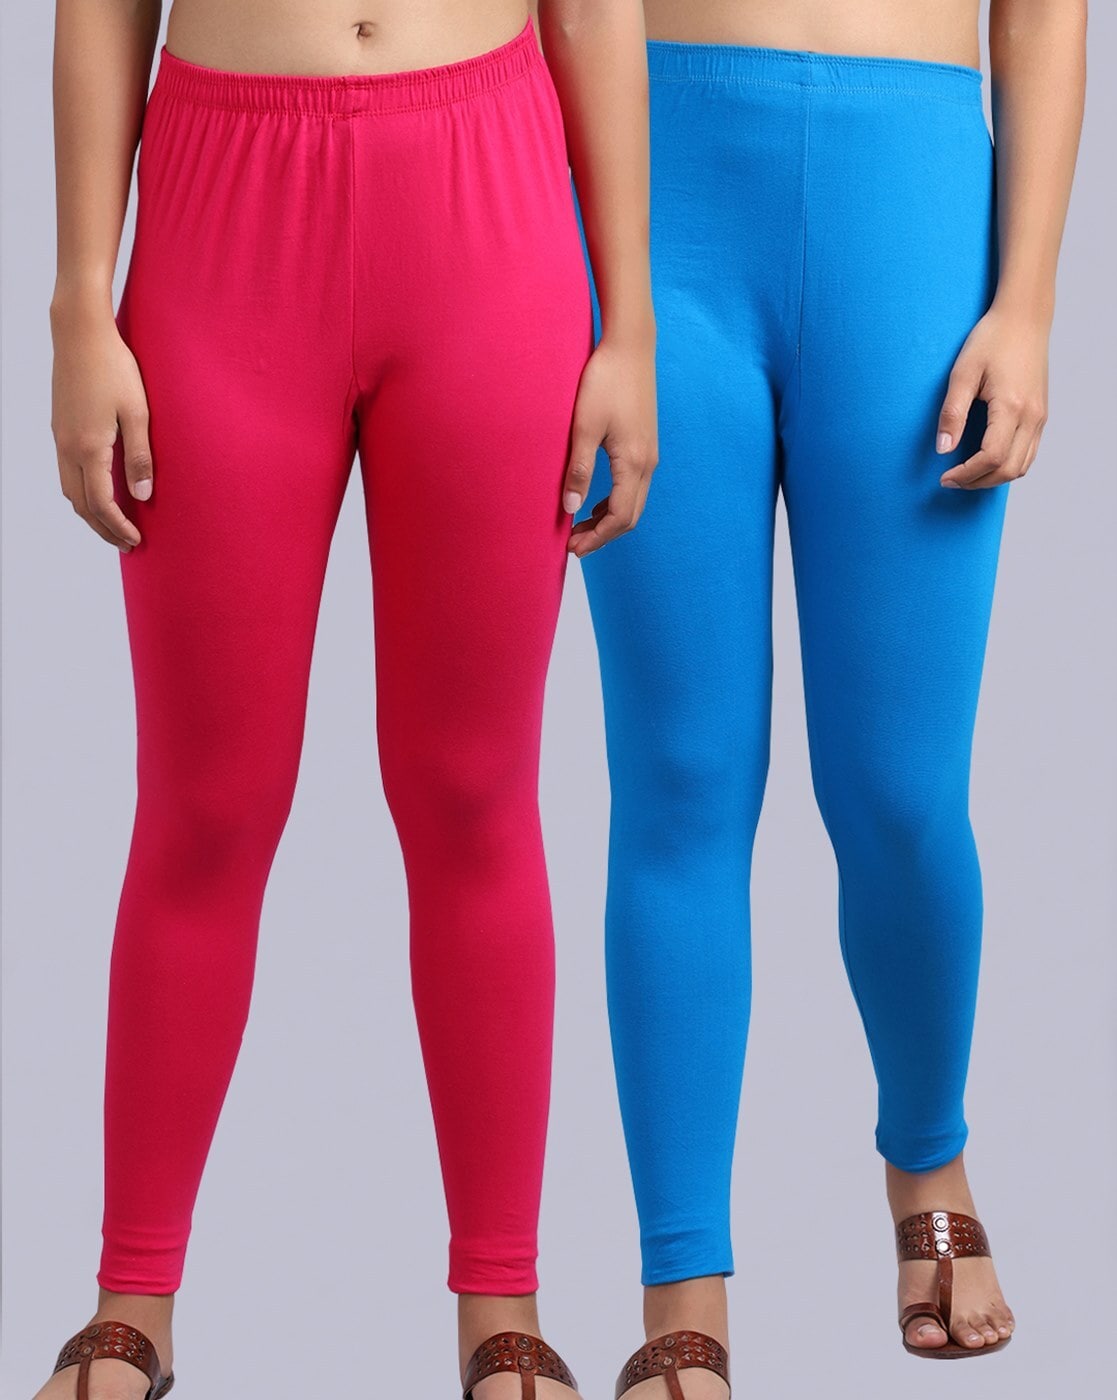 Hot Pink and Blue Workout Outfit | Womens workout outfits, Active wear  outfits, Clothes